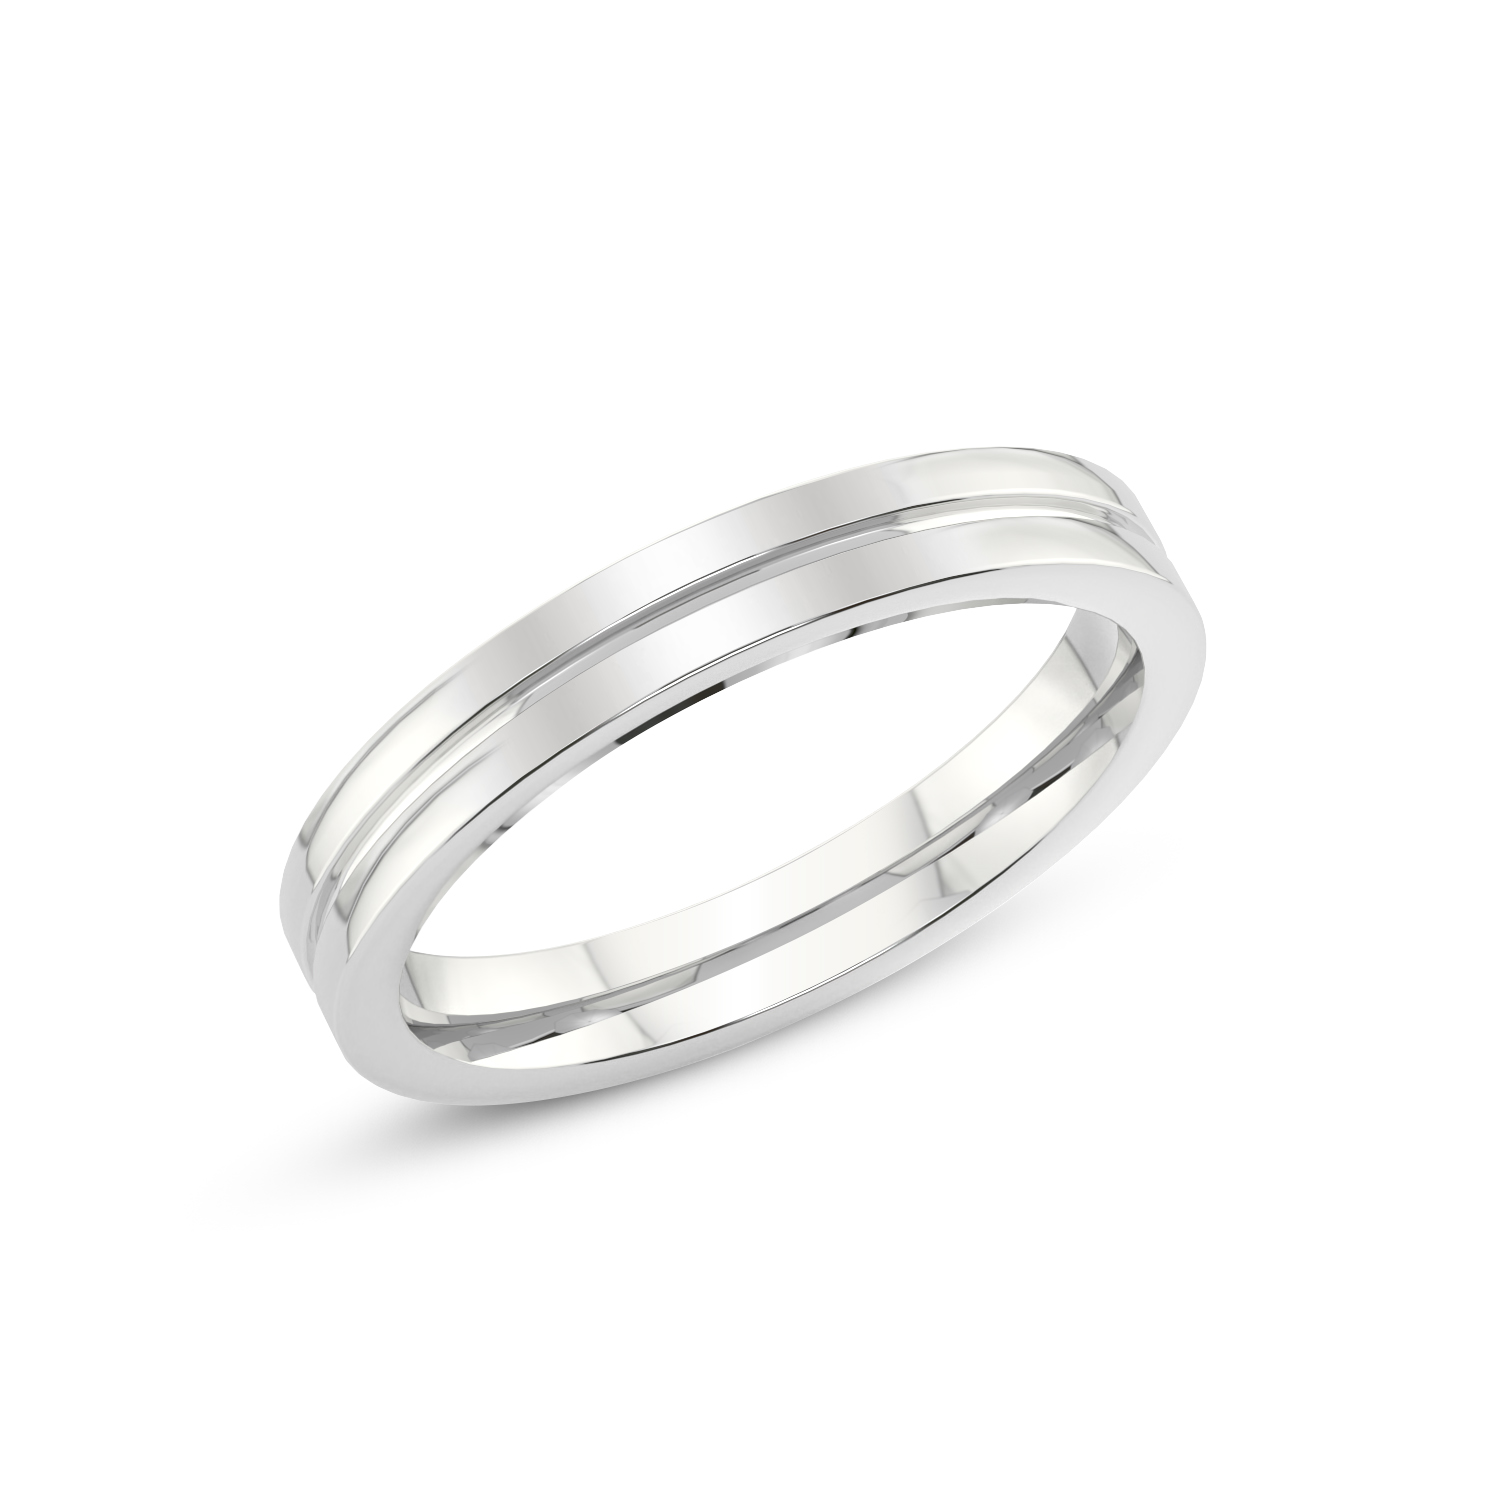 Passion Couple Rings Top View